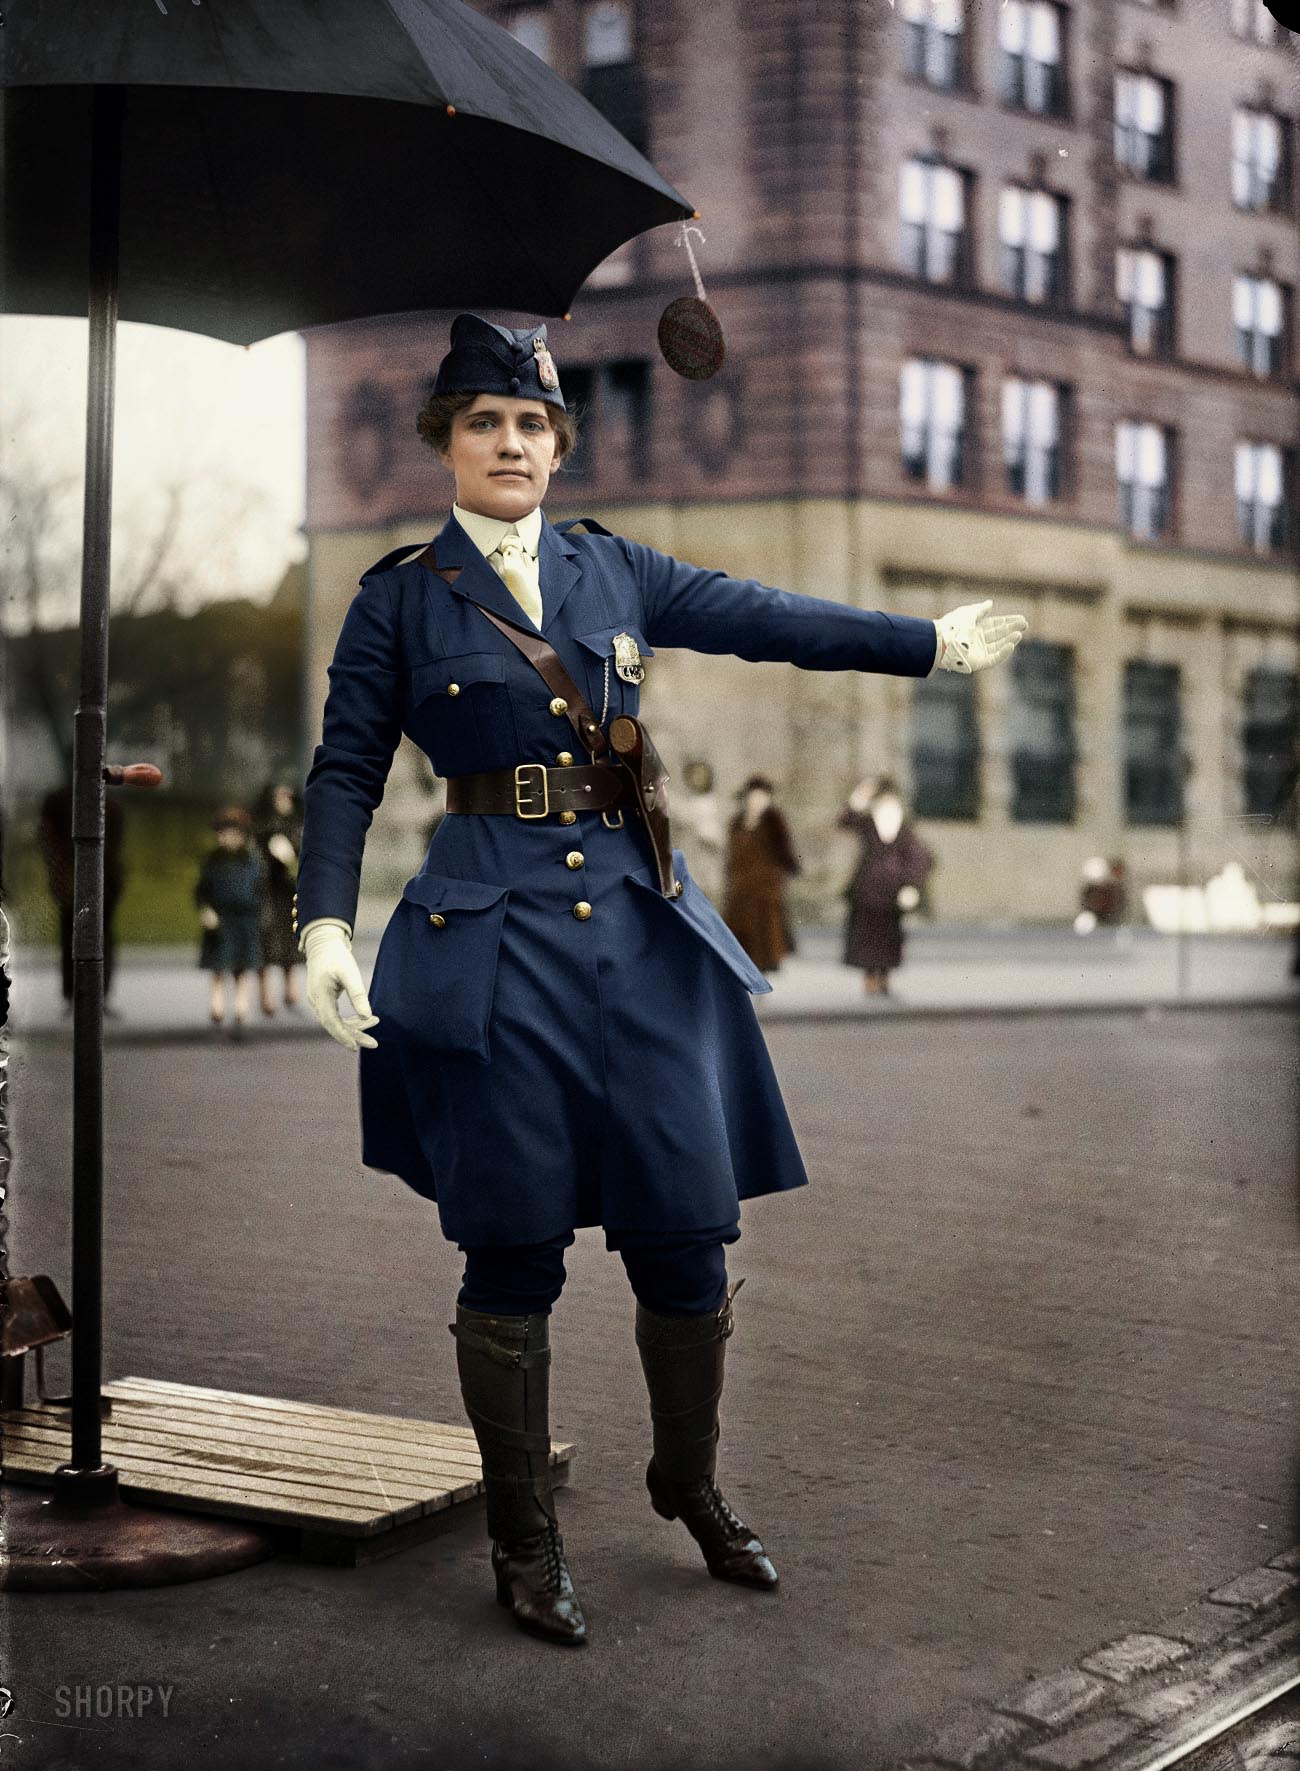 Colorized version of this Shorpy original. I was fascinated by this woman and tried to make this photo in color. I hope you enjoy.